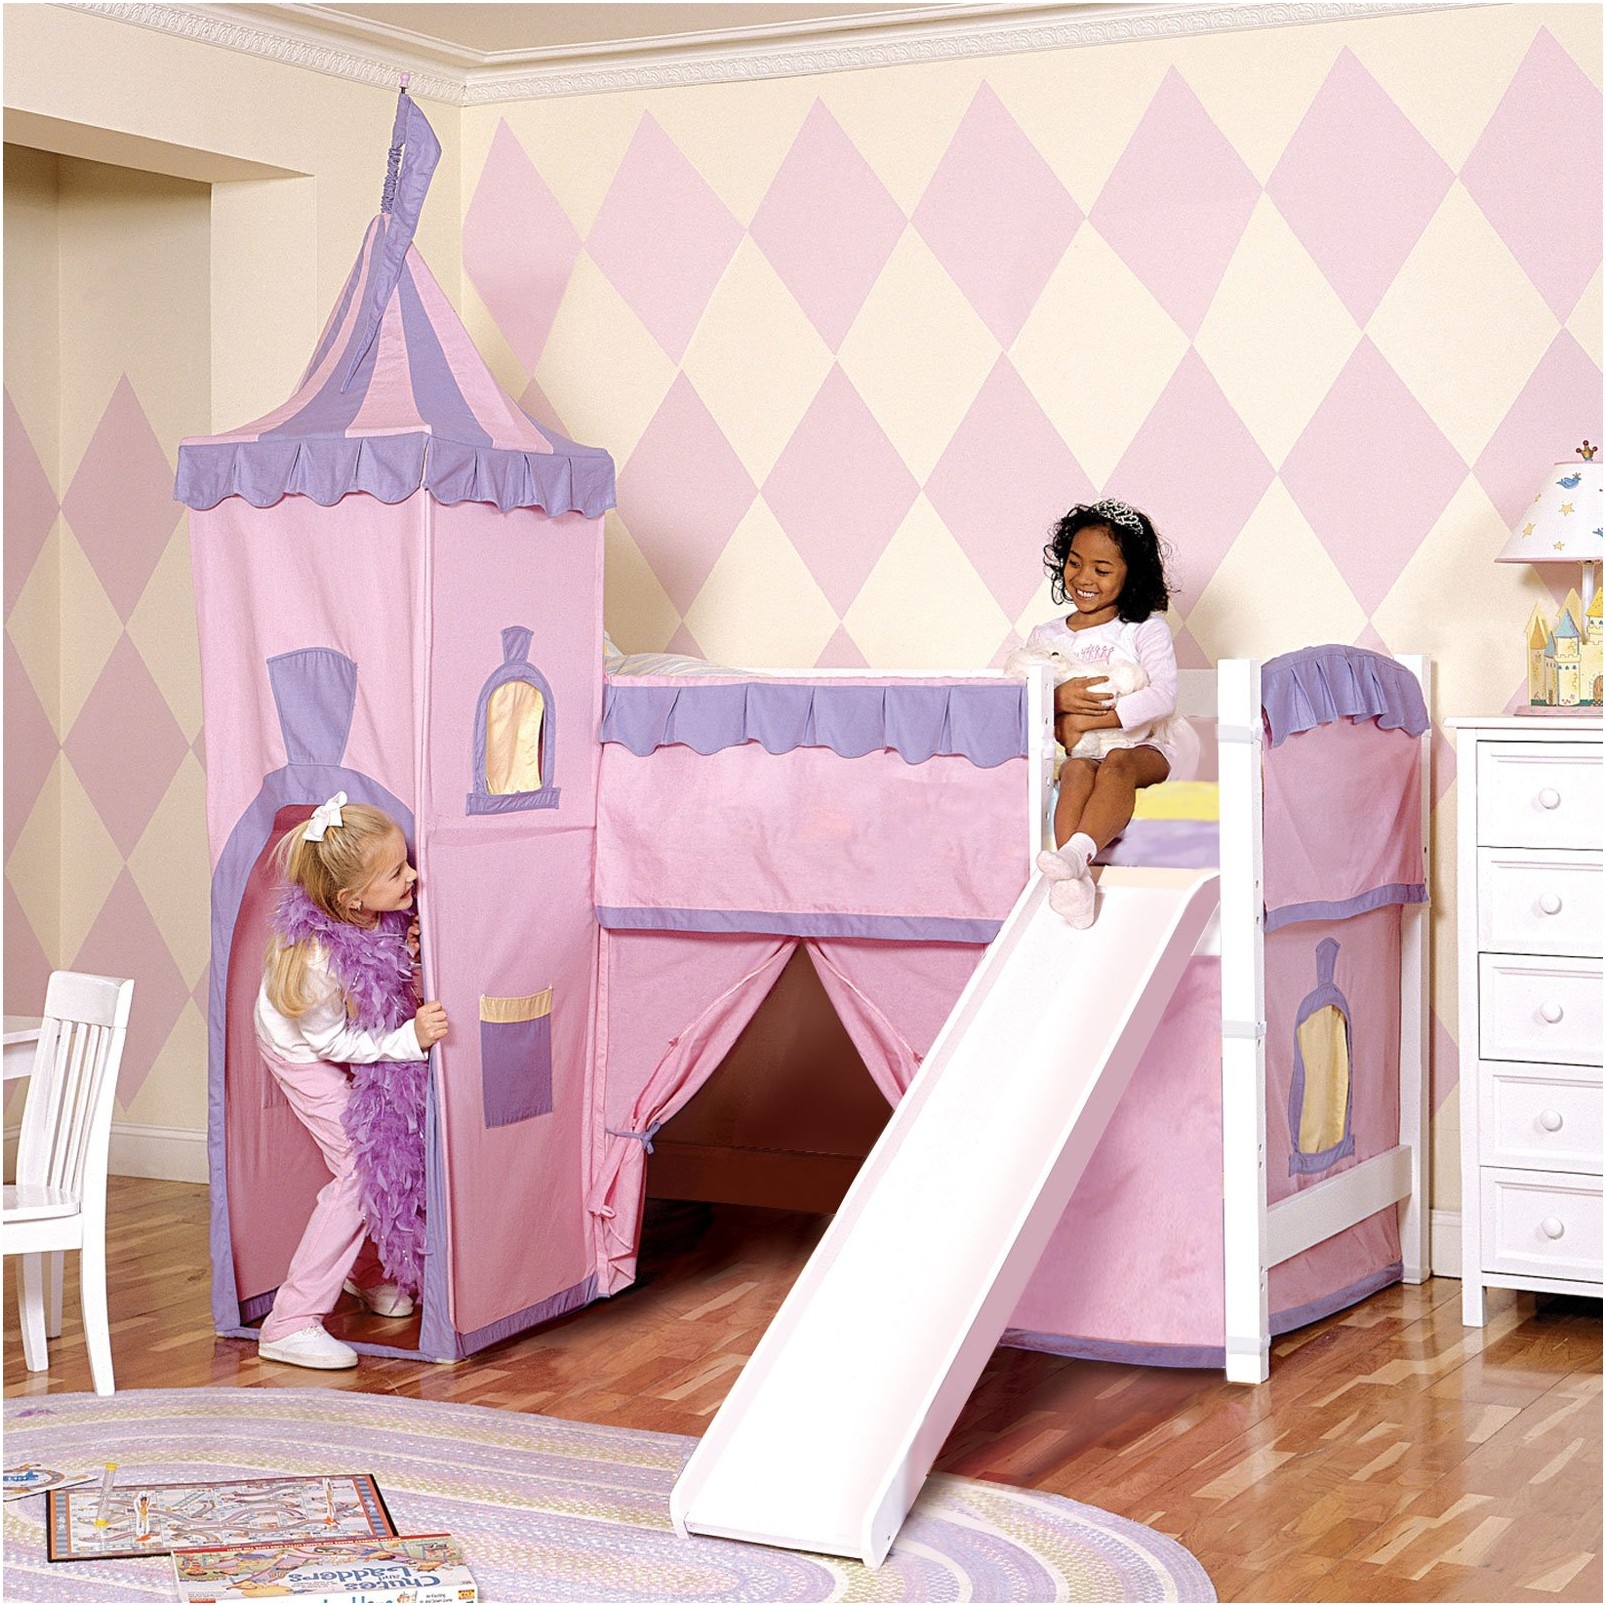 Bunk bed with slide and tent